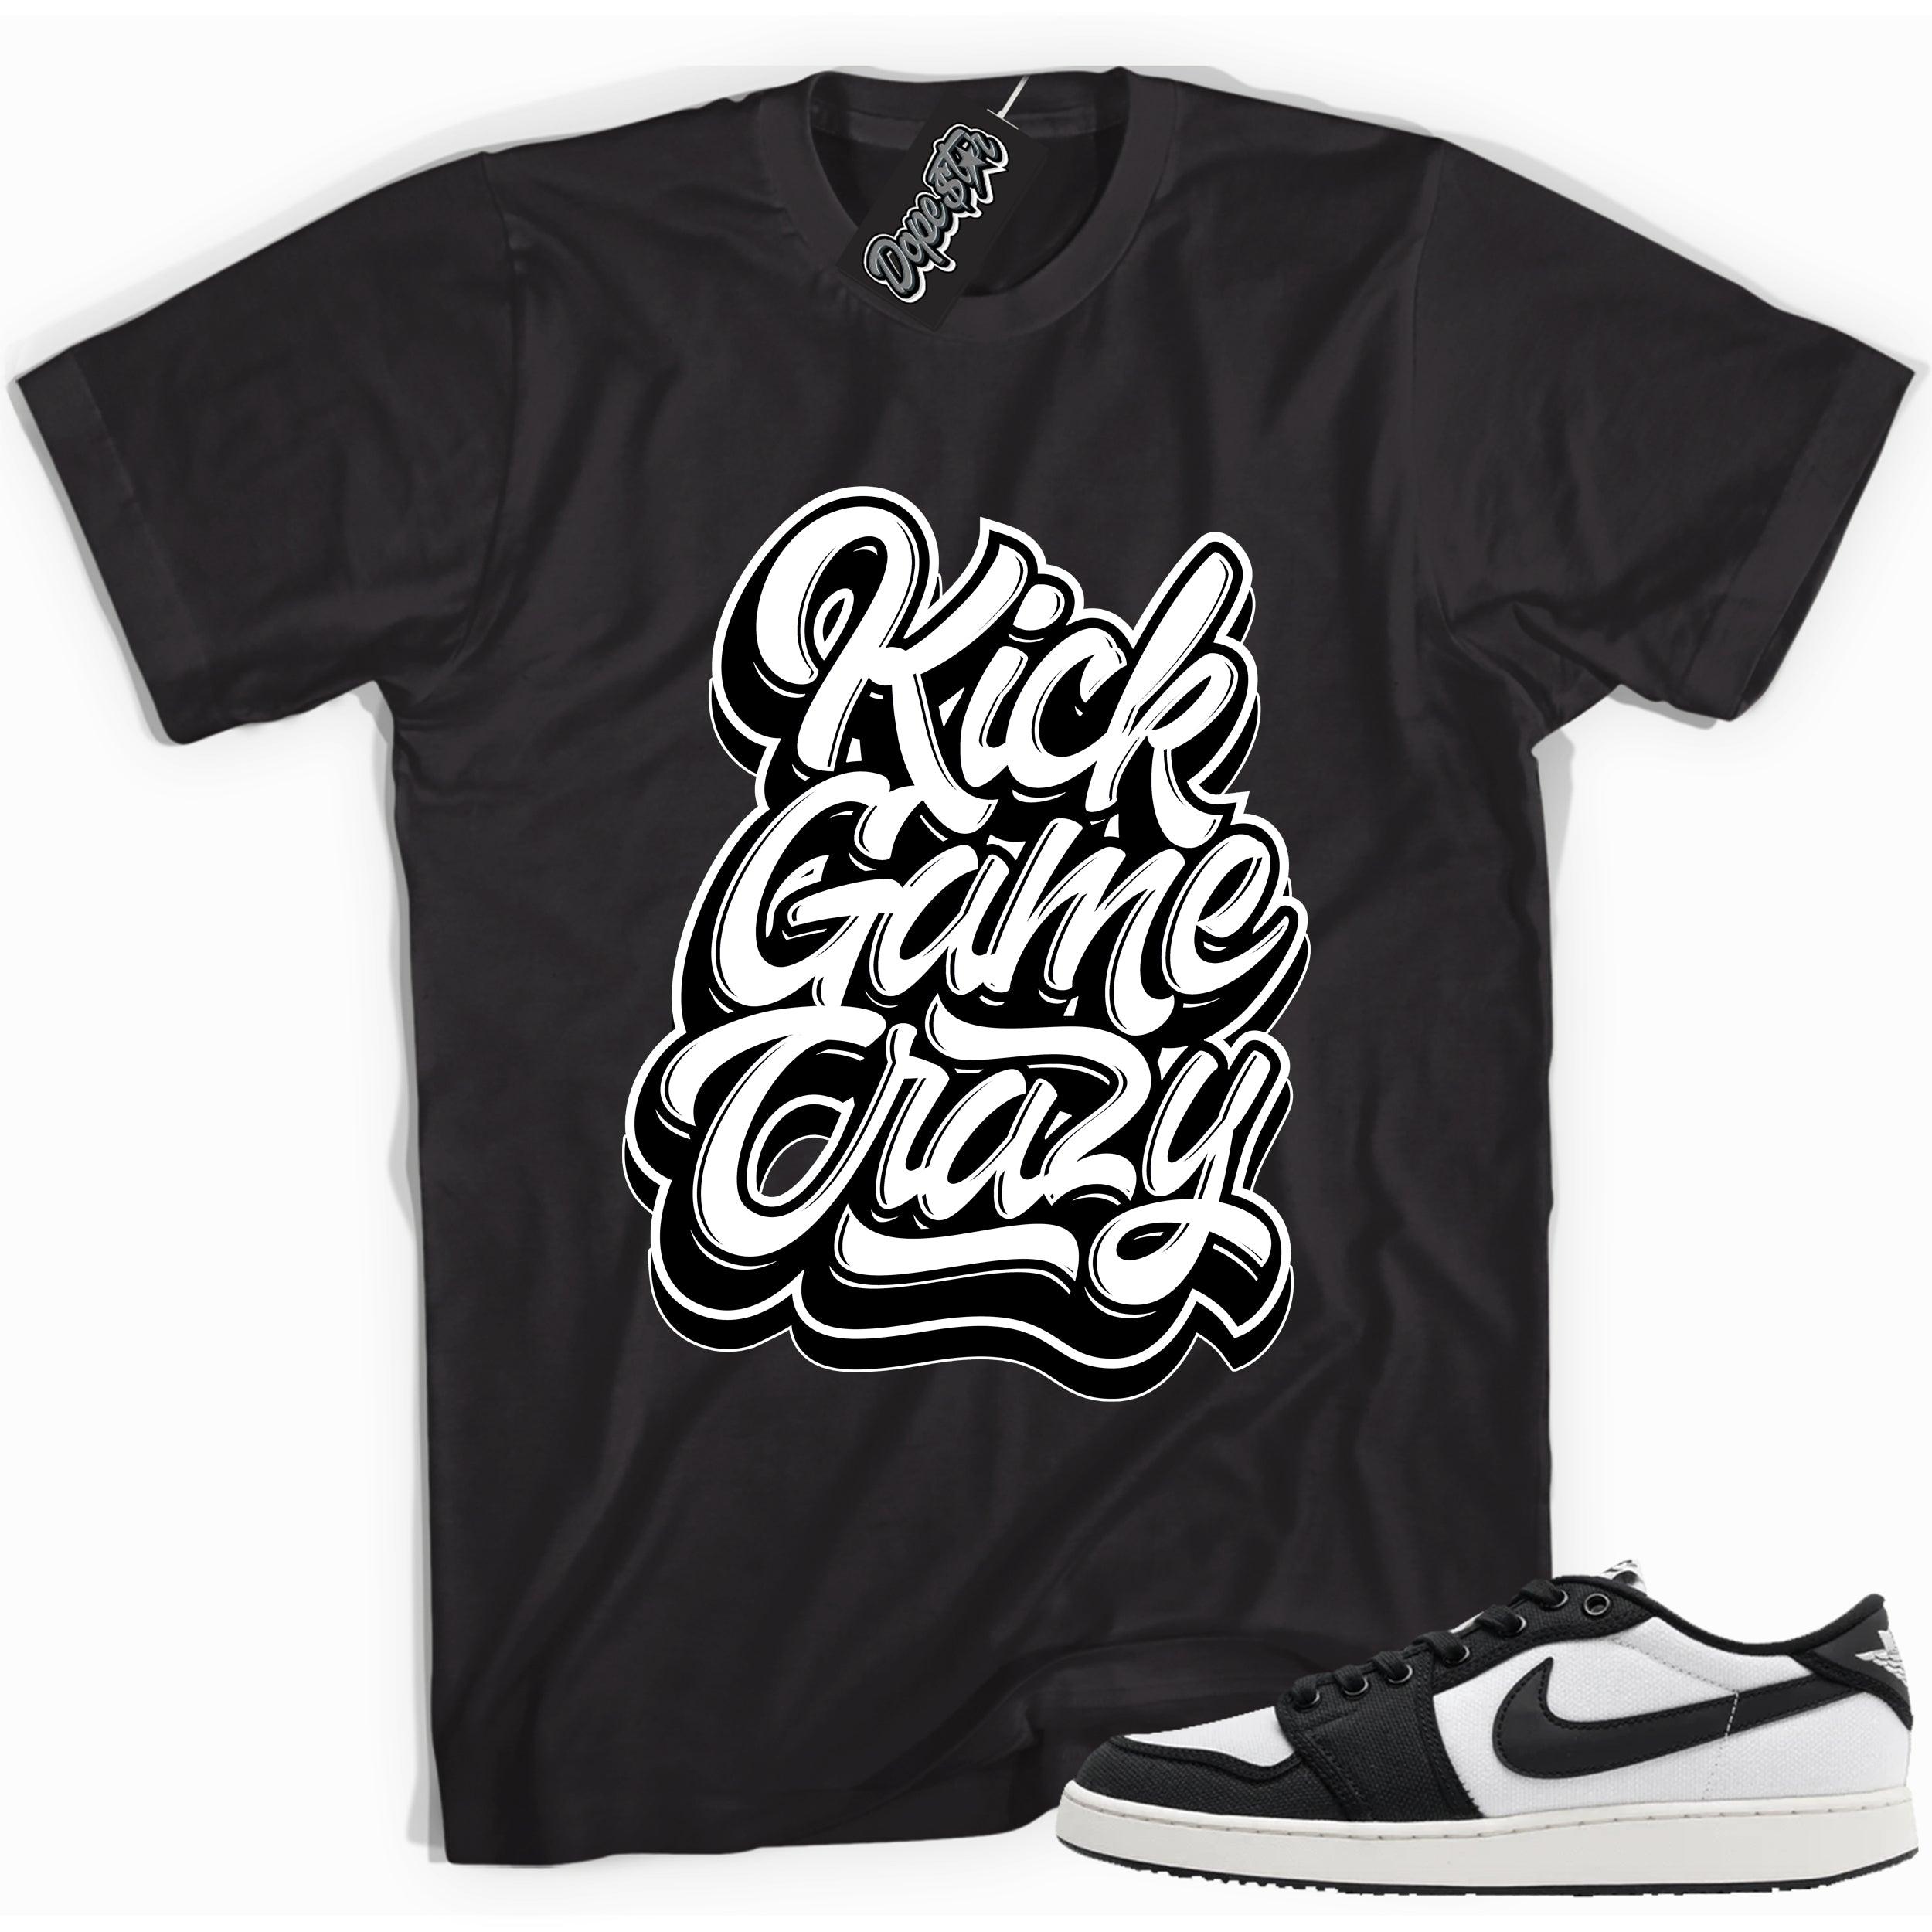 Cool black graphic tee with 'kick game crazy' print, that perfectly matches Air Jordan 1 Retro Ajko Low Black & White sneakers.